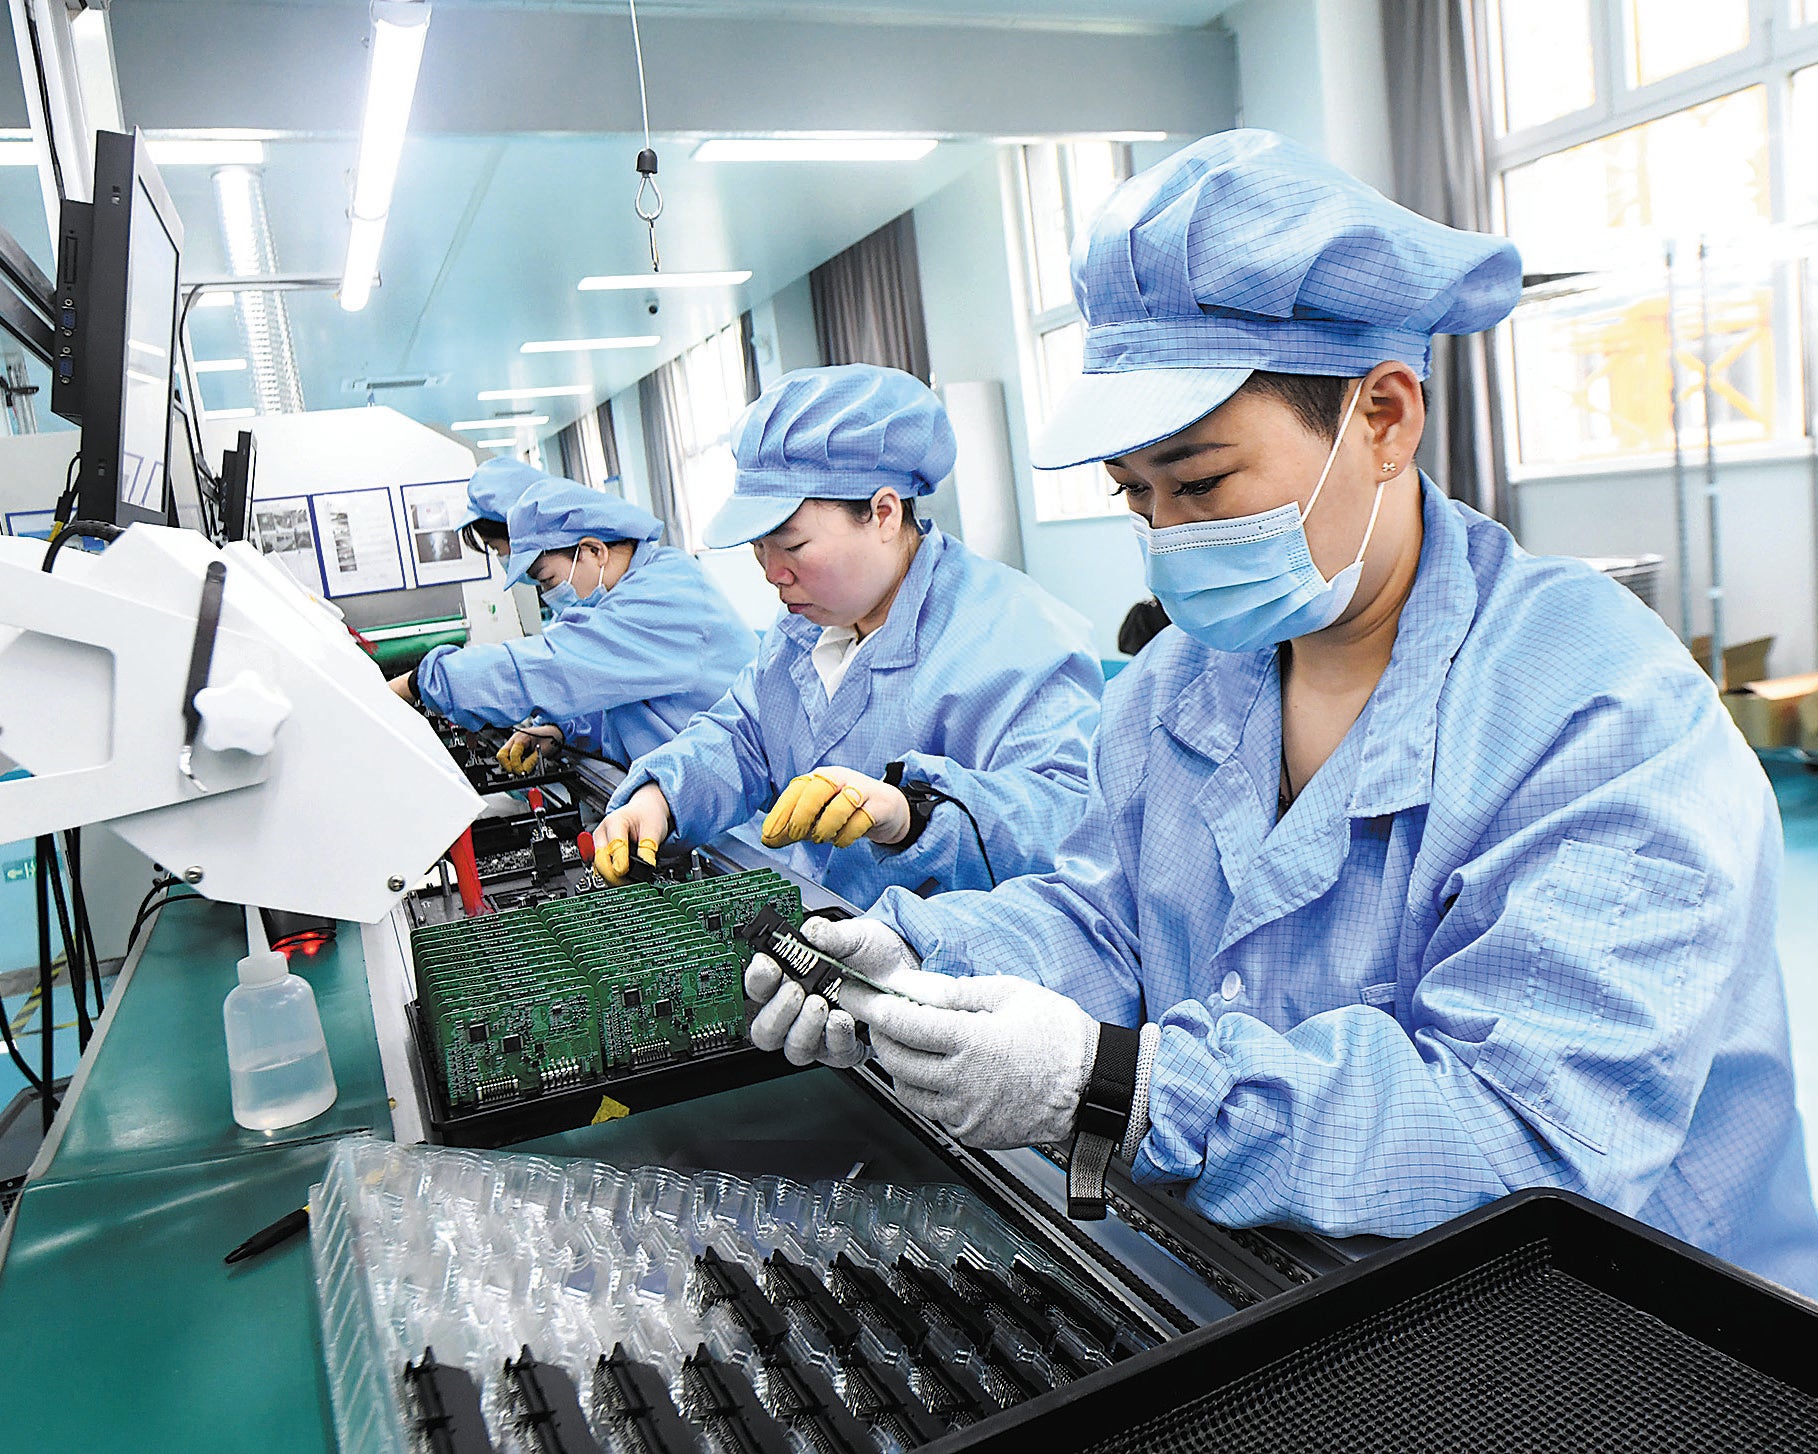 Employees work on a production line of export-bound electronics in Shijiazhuang, Hebei province